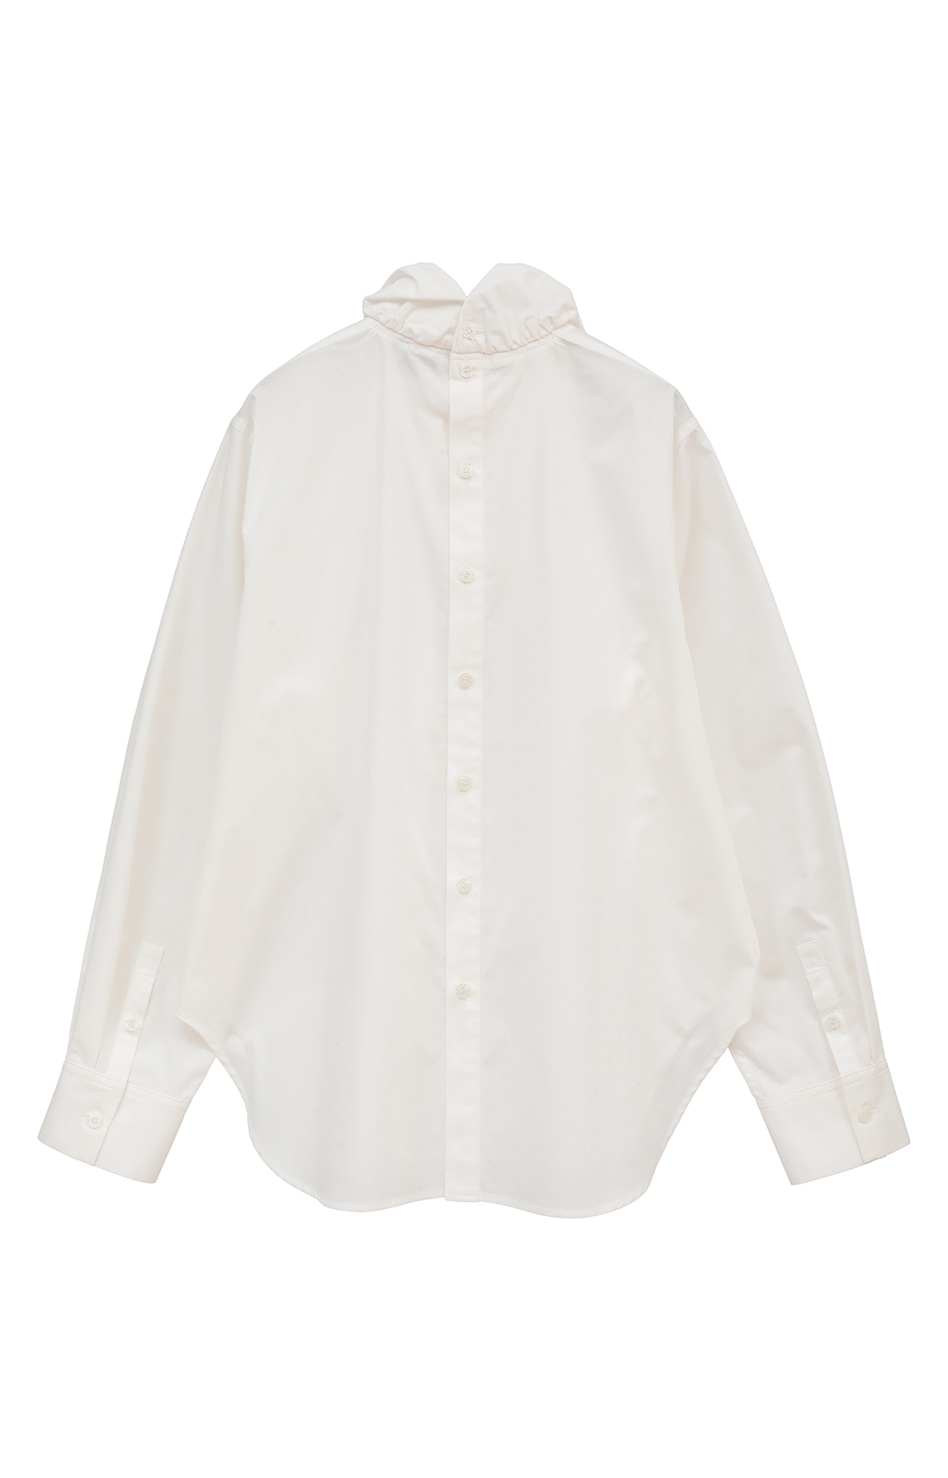 BALLOON NECK SHIRT｜TOPS(トップス)｜CLANE OFFICIAL ONLINE STORE